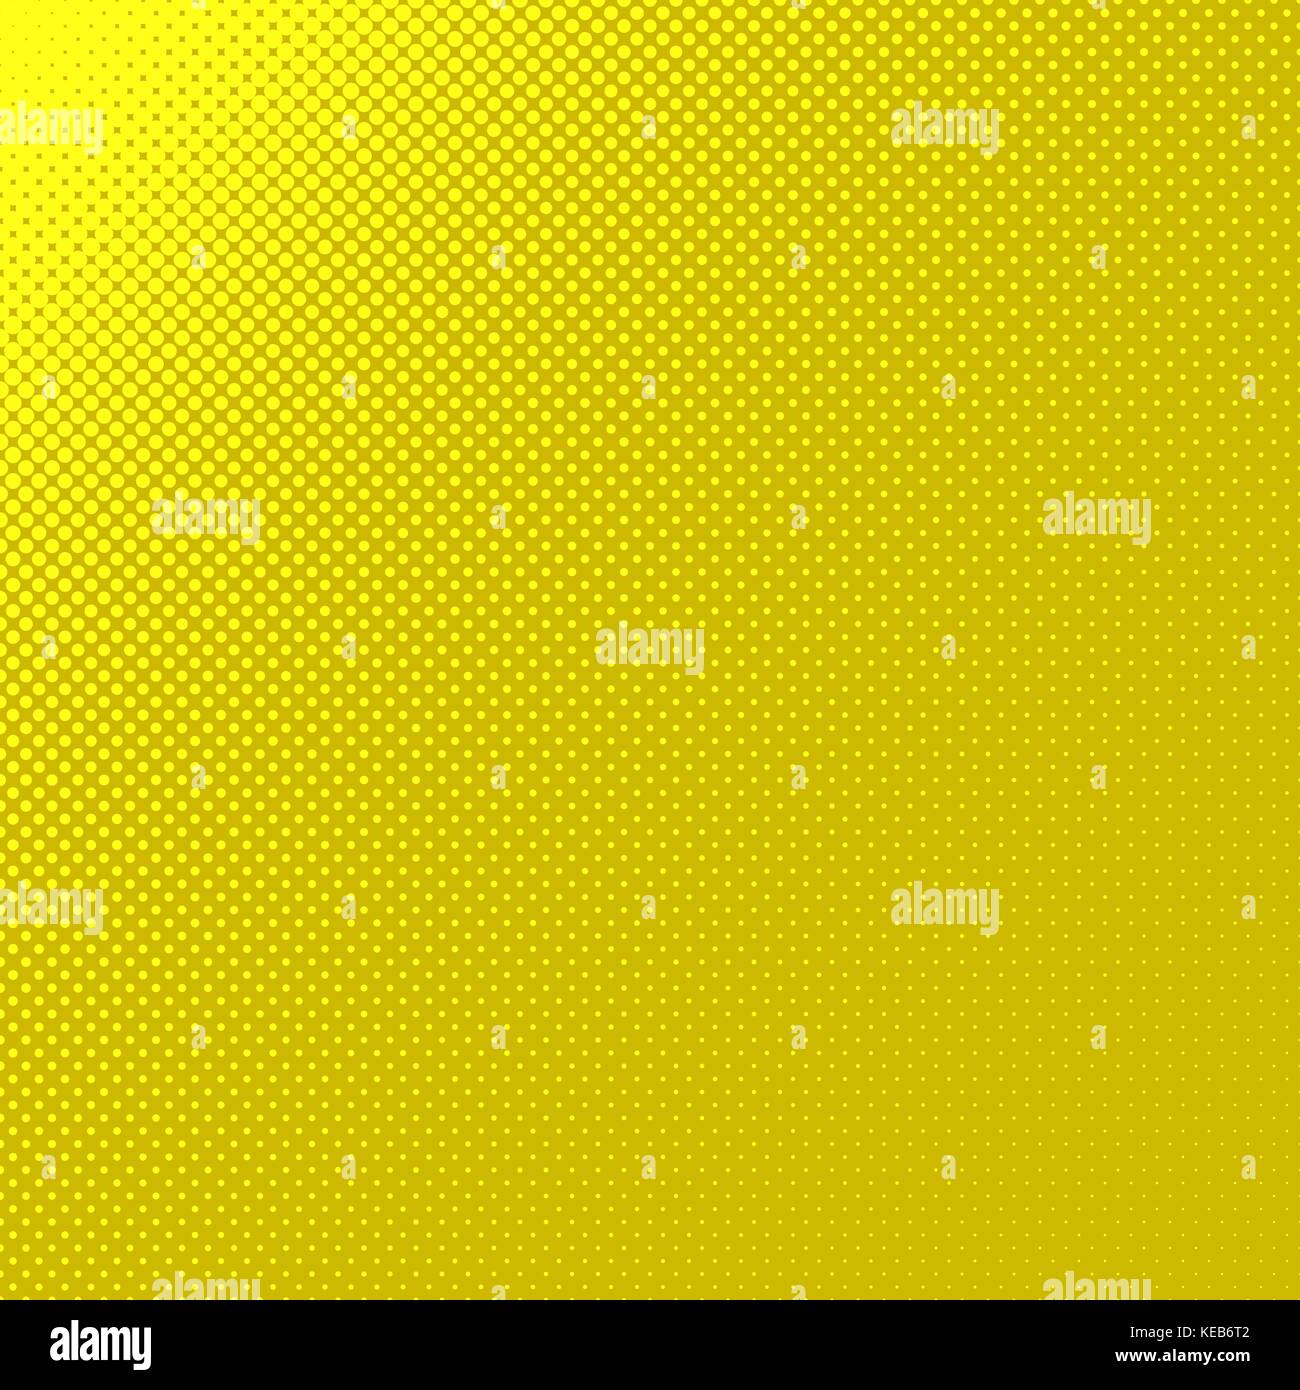 Geometric halftone dot pattern background - vector design from circles in varying sizes Stock Vector